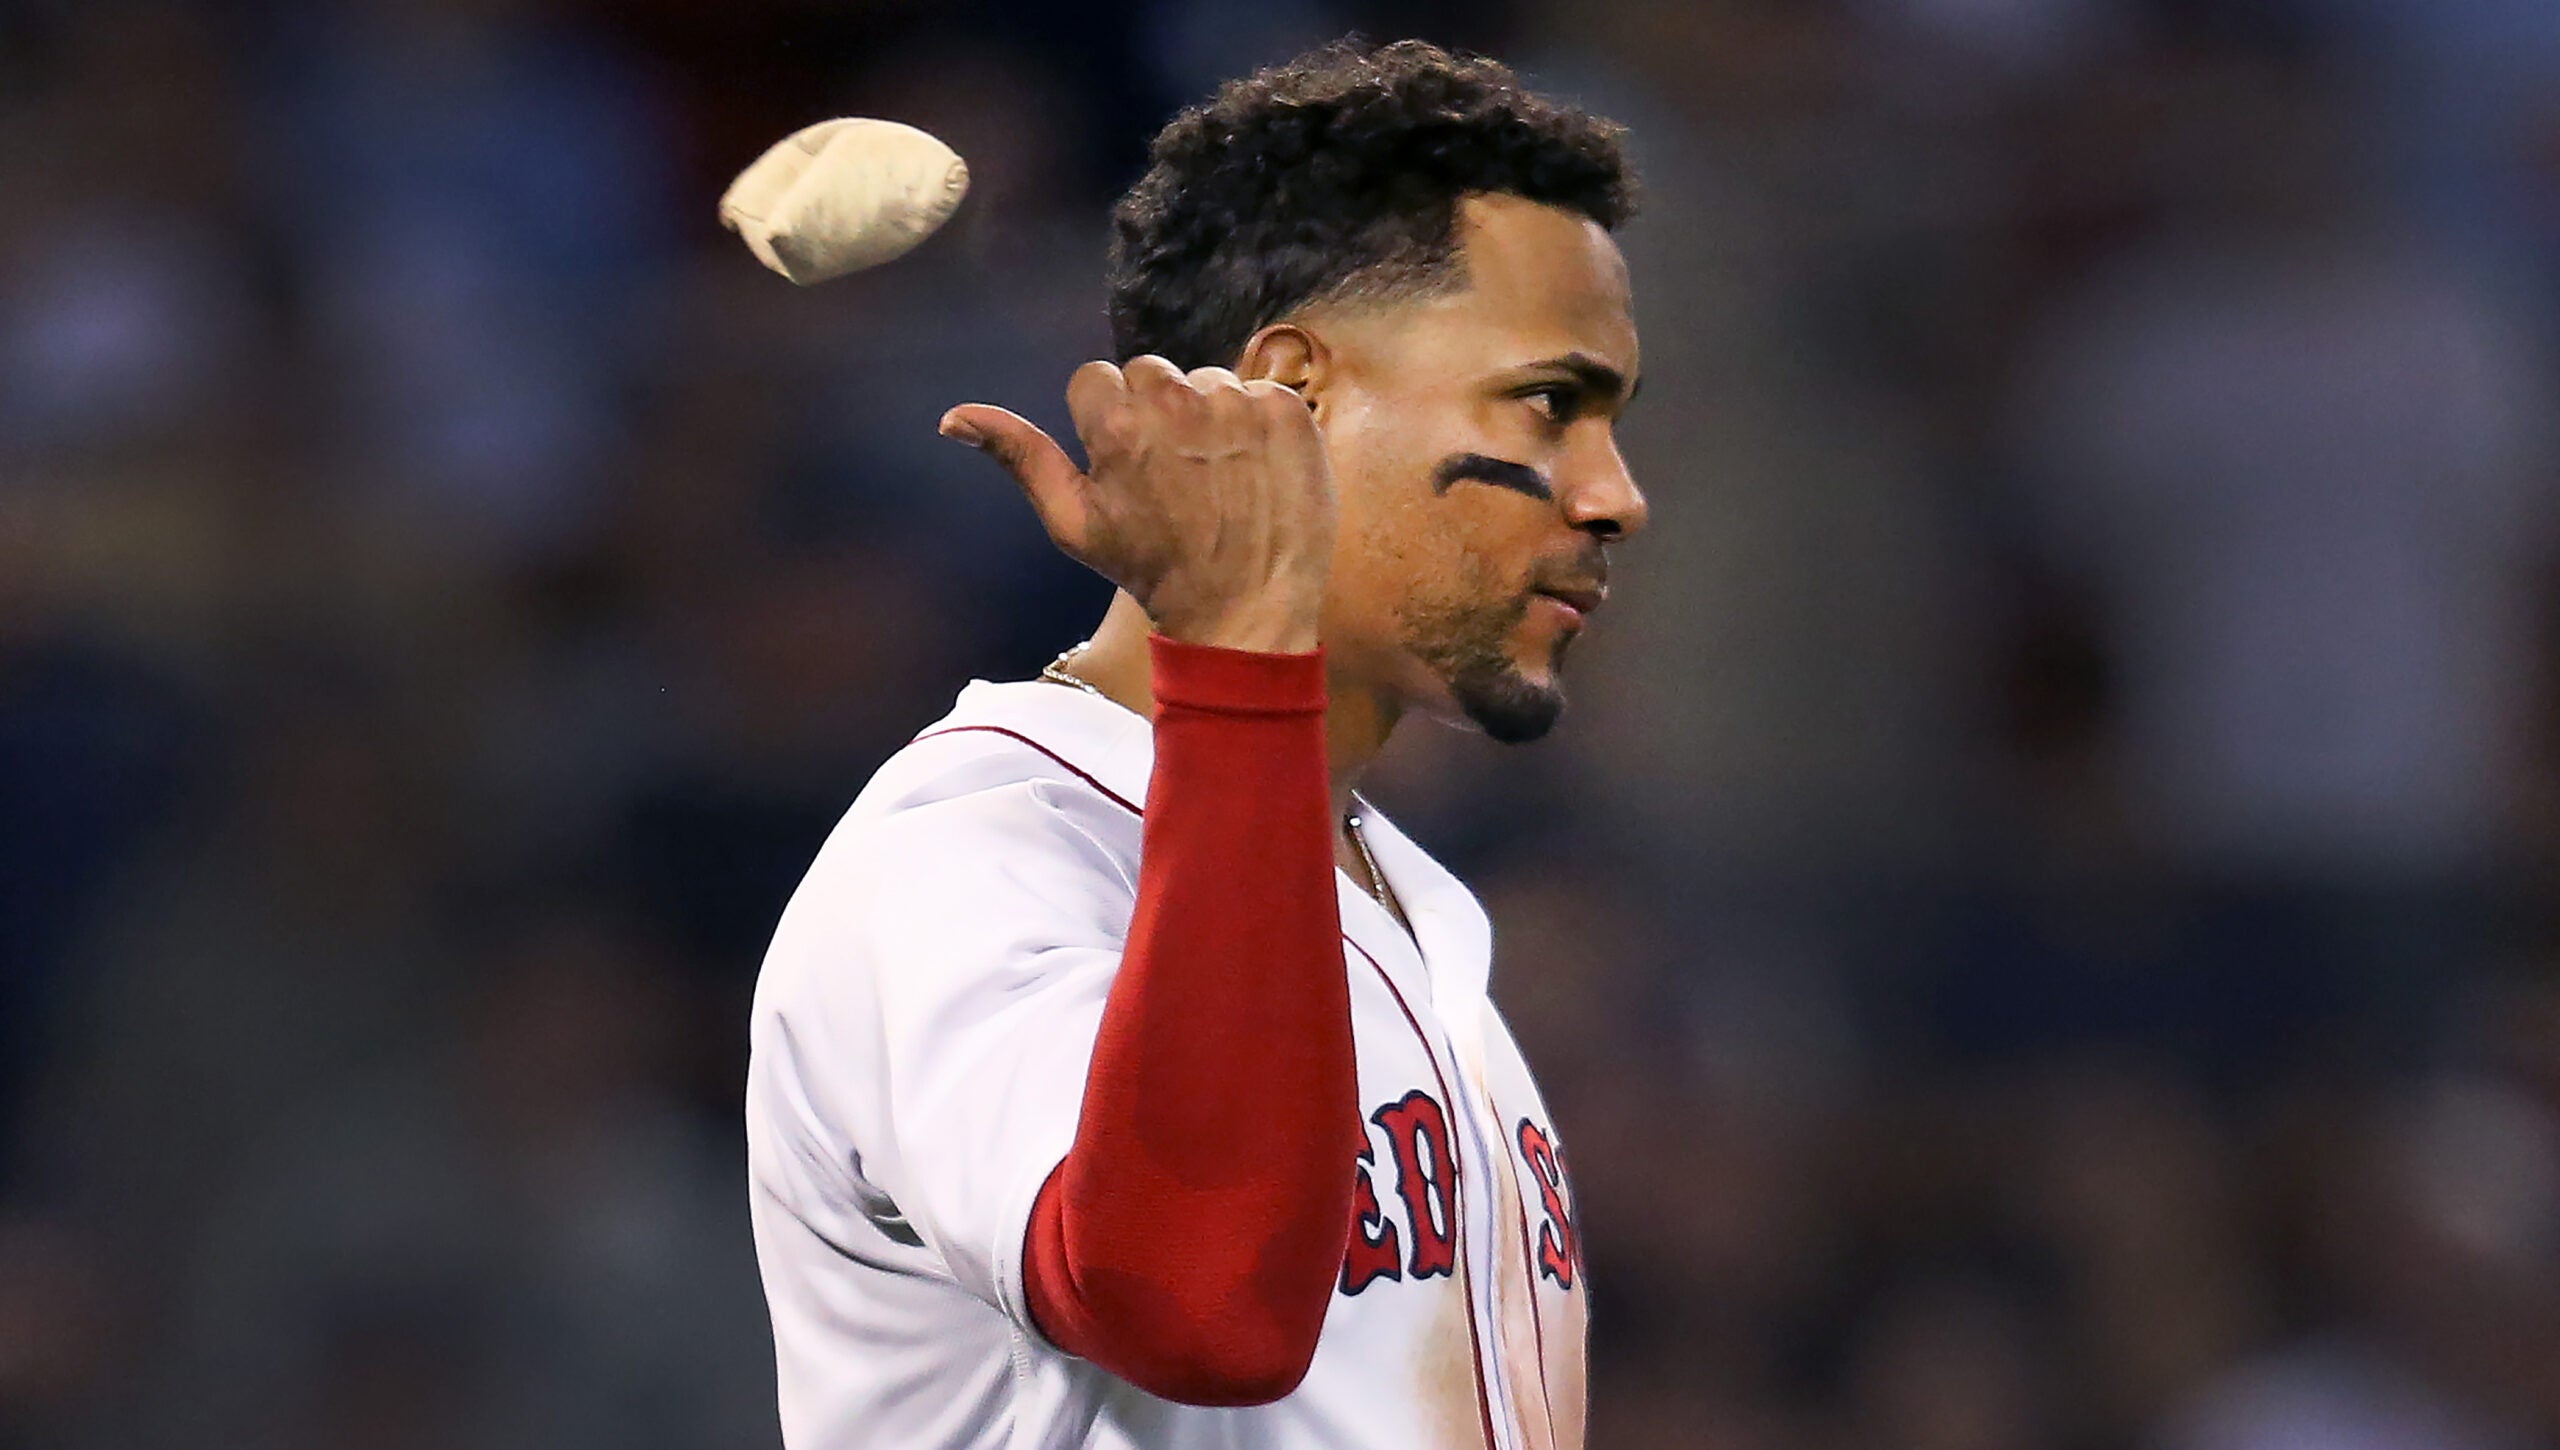 Profile of disspirited Xander Bogaerts throwing a rosin bag over his right shoulder.